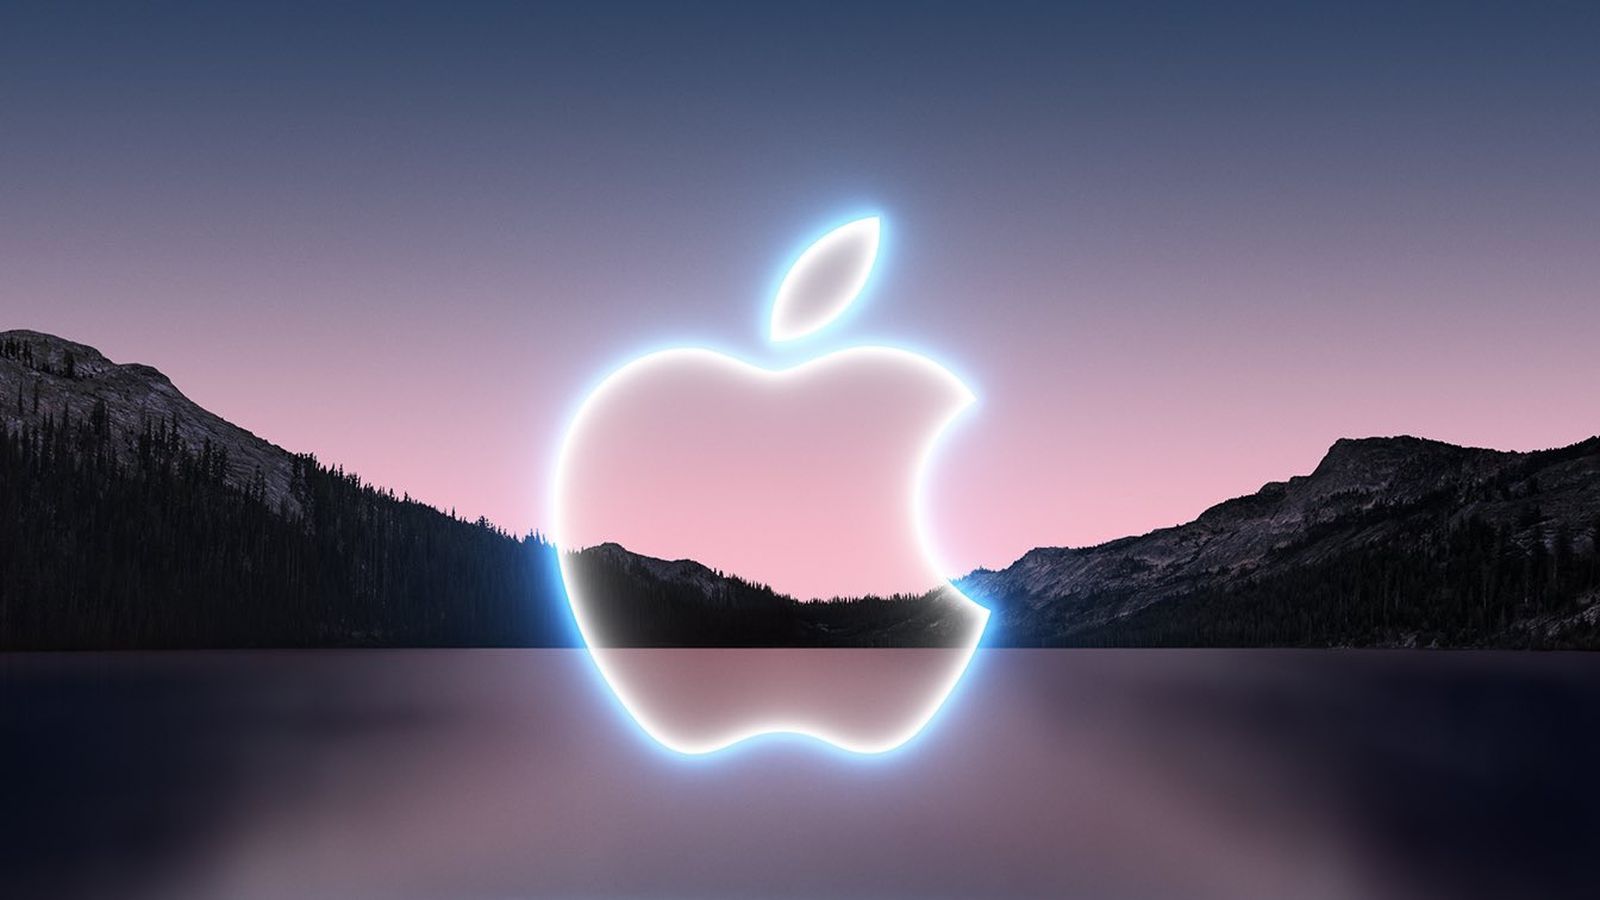 Gurman: Apple&#39;s Second Fall Event to Focus on Both New Macs and New iPads - MacRumors